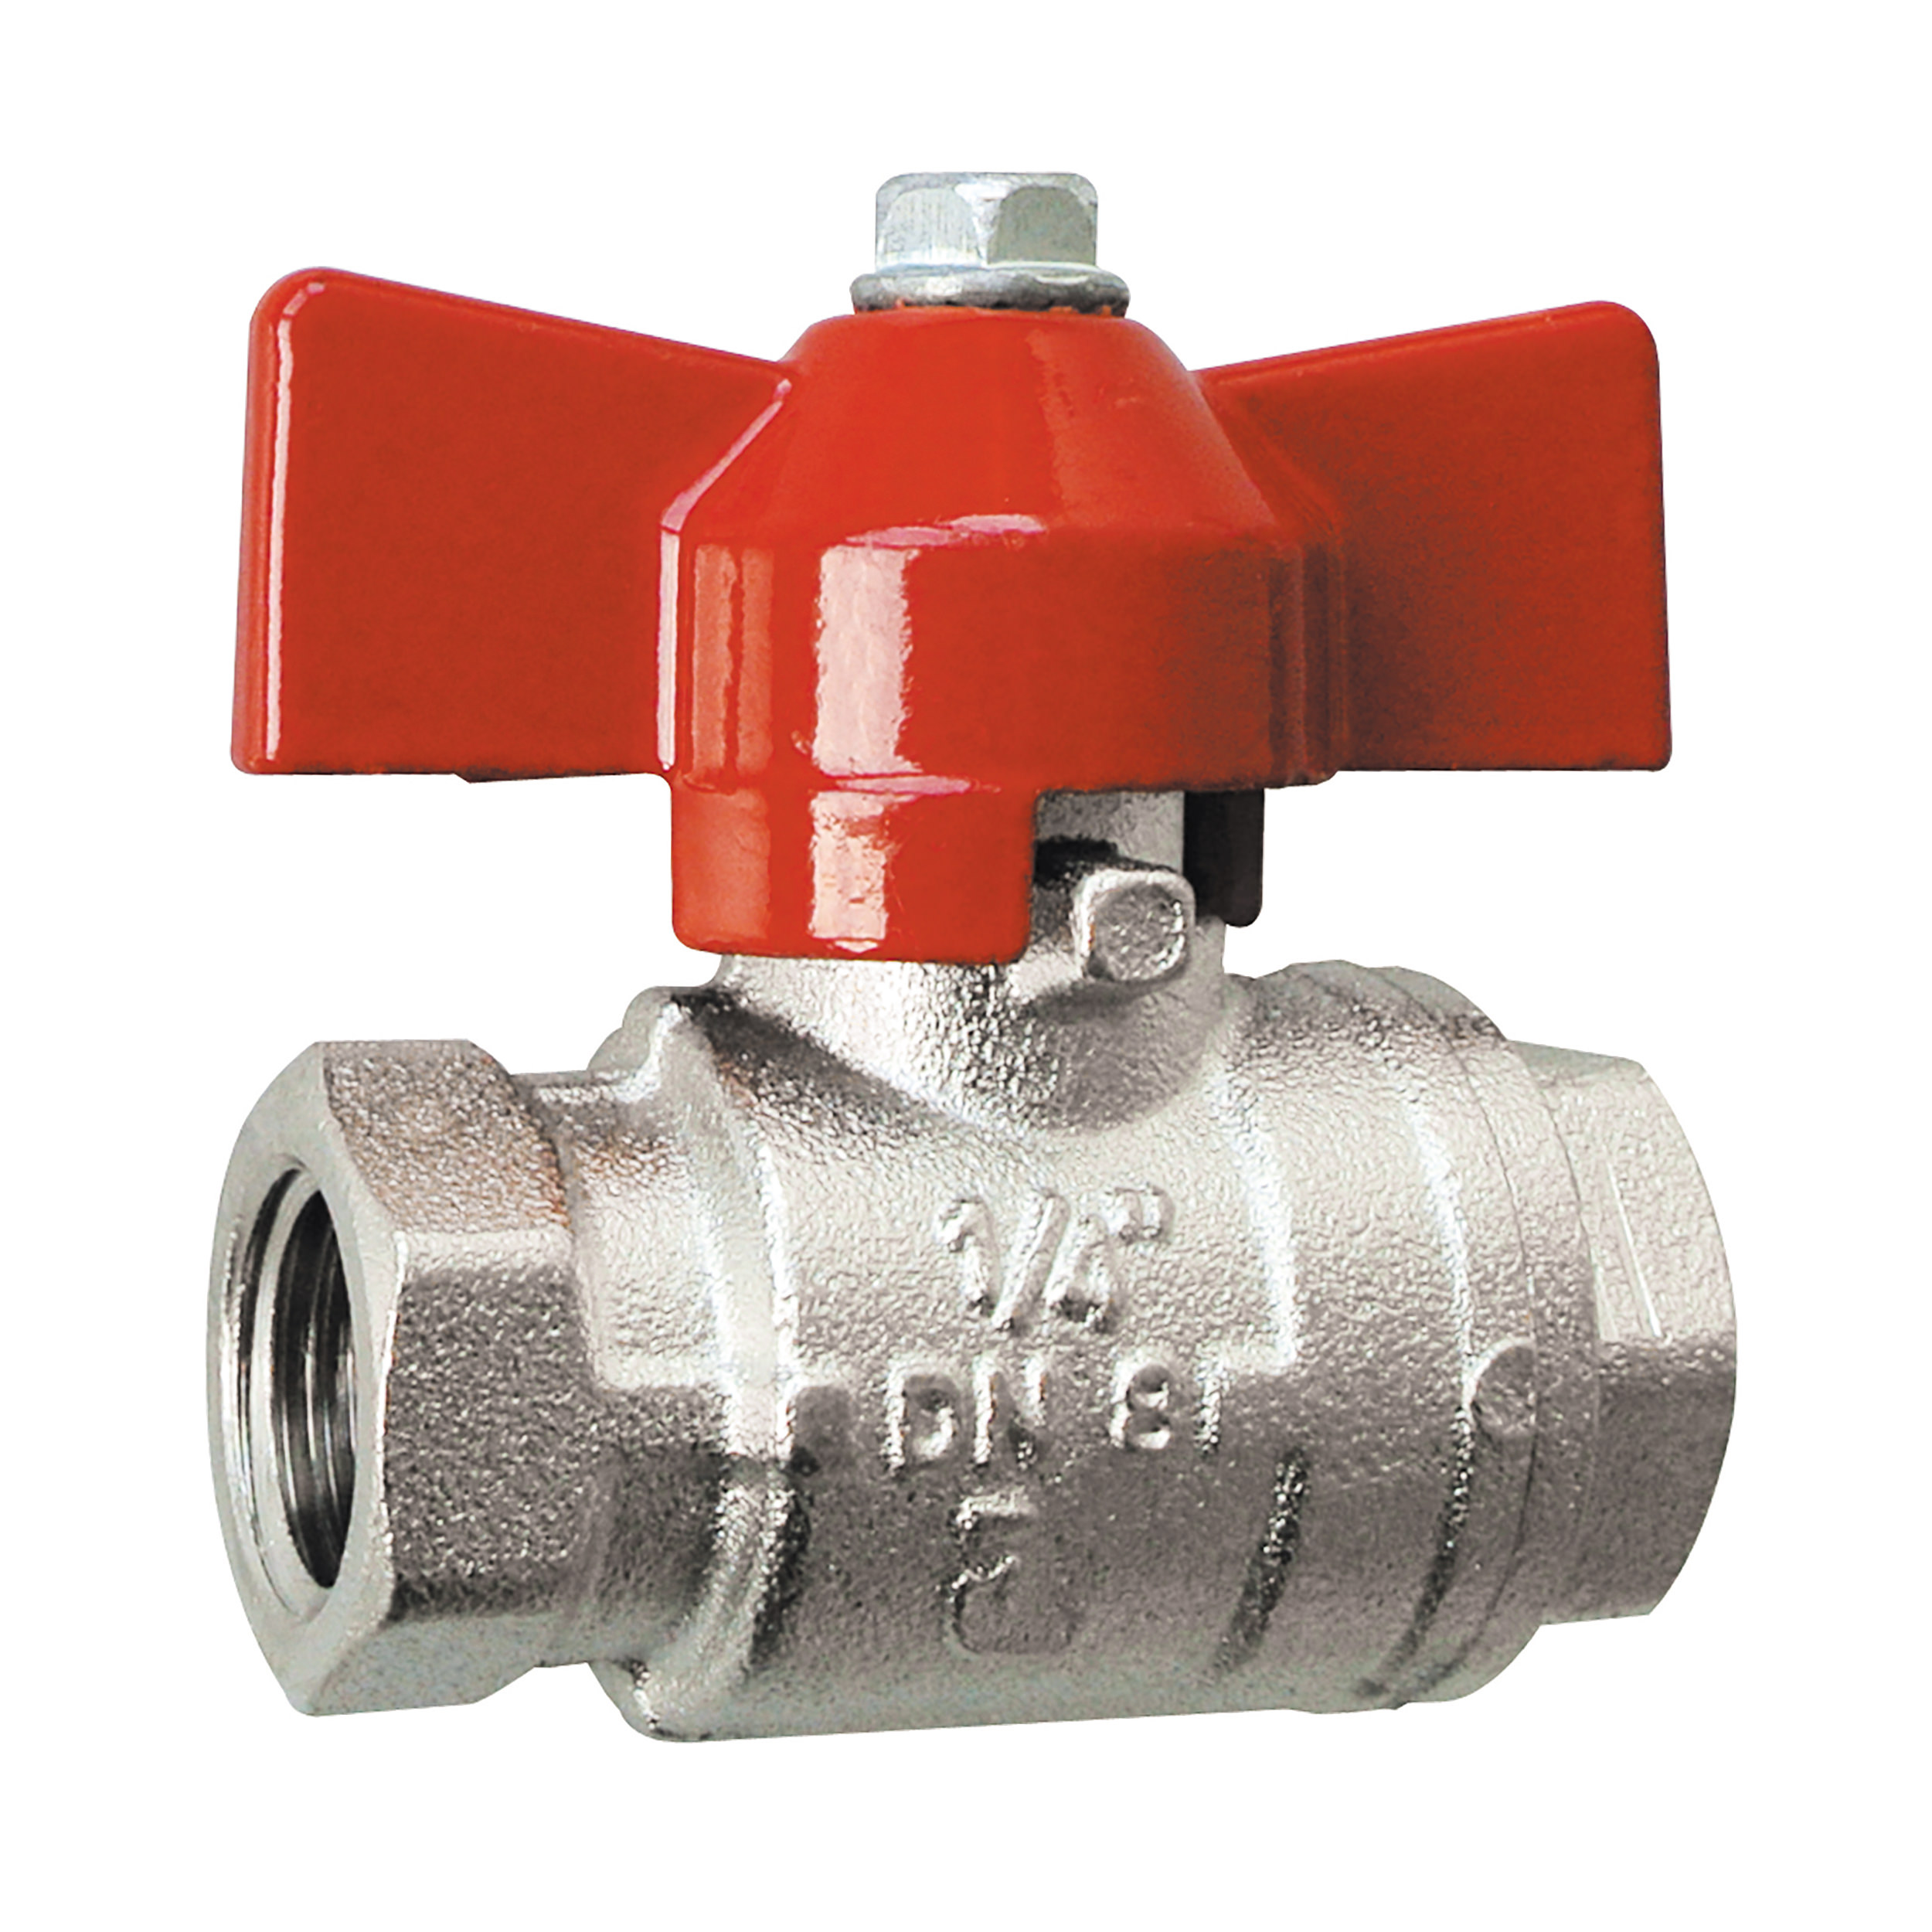 Mini ball valve, metal toggle, max. operating pressure: 435 psi, length: 47 mm, DN 10, connection thread: G⅜ female–female